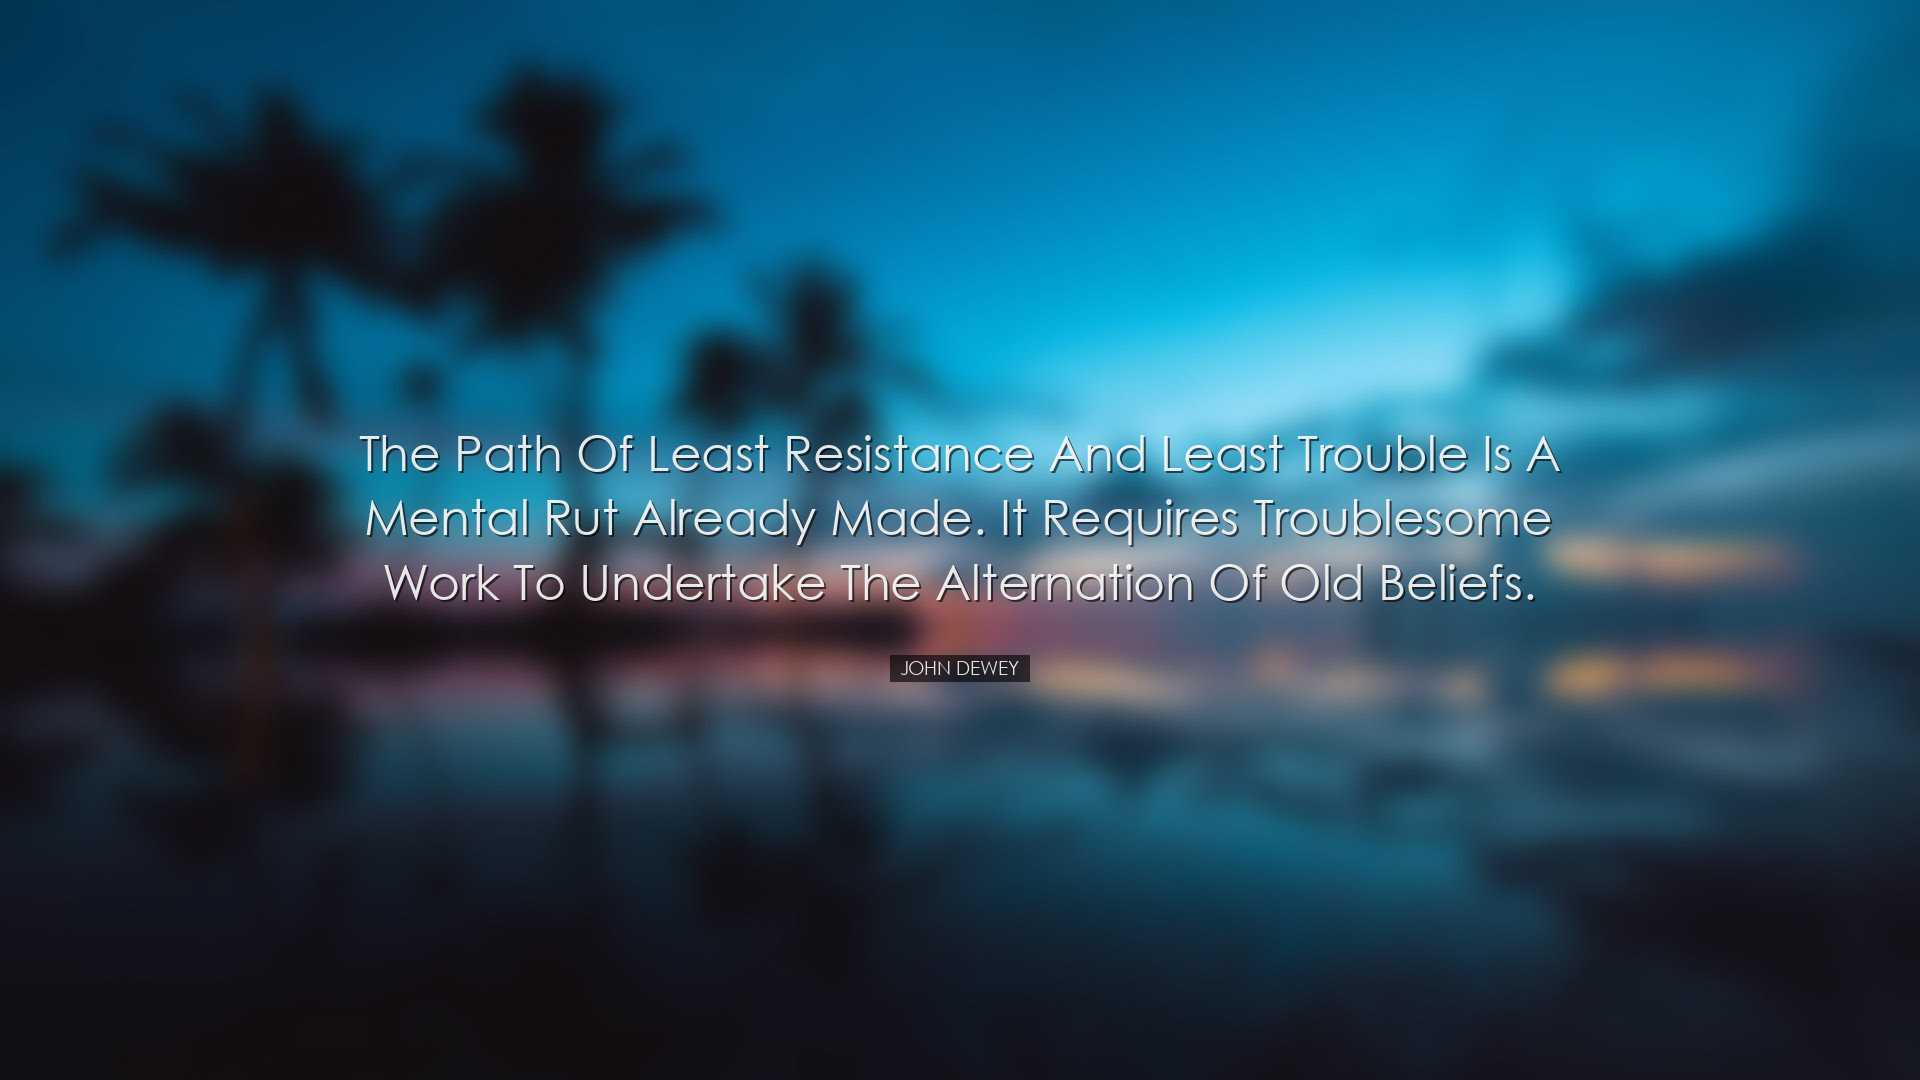 The path of least resistance and least trouble is a mental rut alr